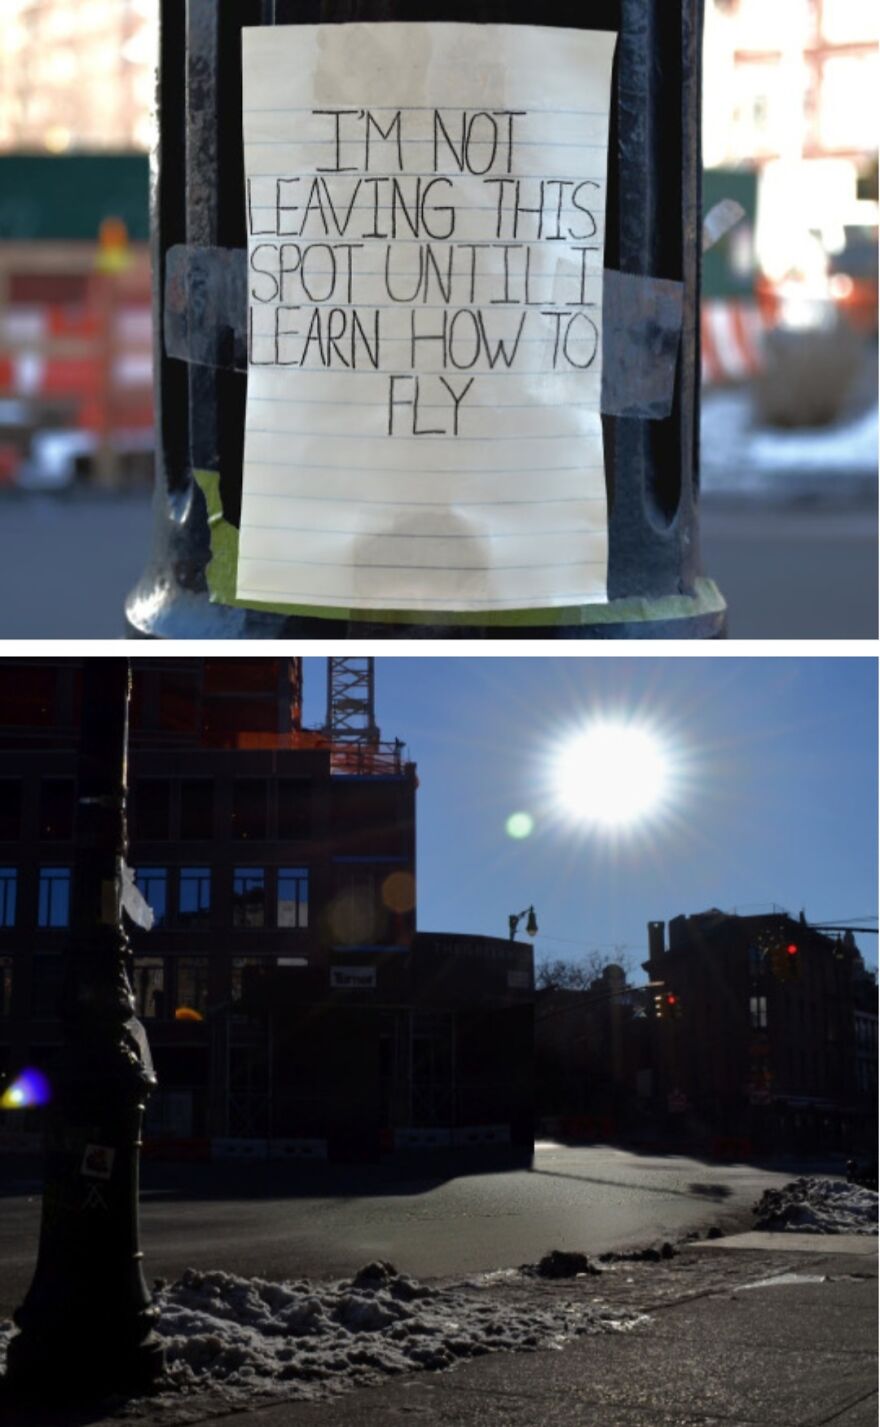 Street Artist Posts Notes All Over NYC (10 Pics)